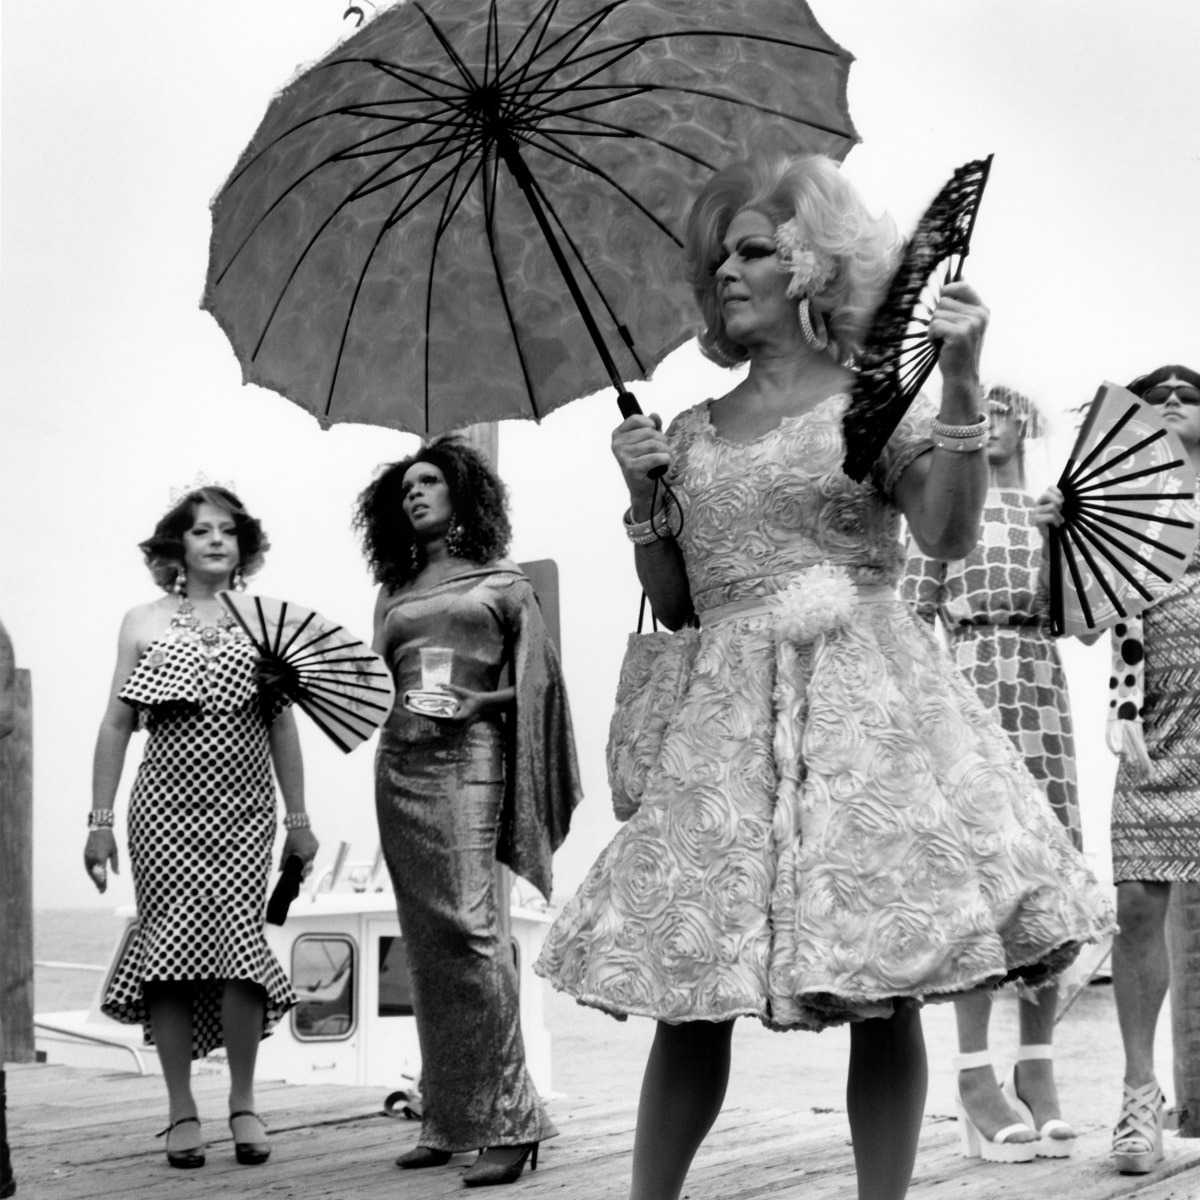 Phillip Gutman, Dock Queens with Fans and Parasols, 2018